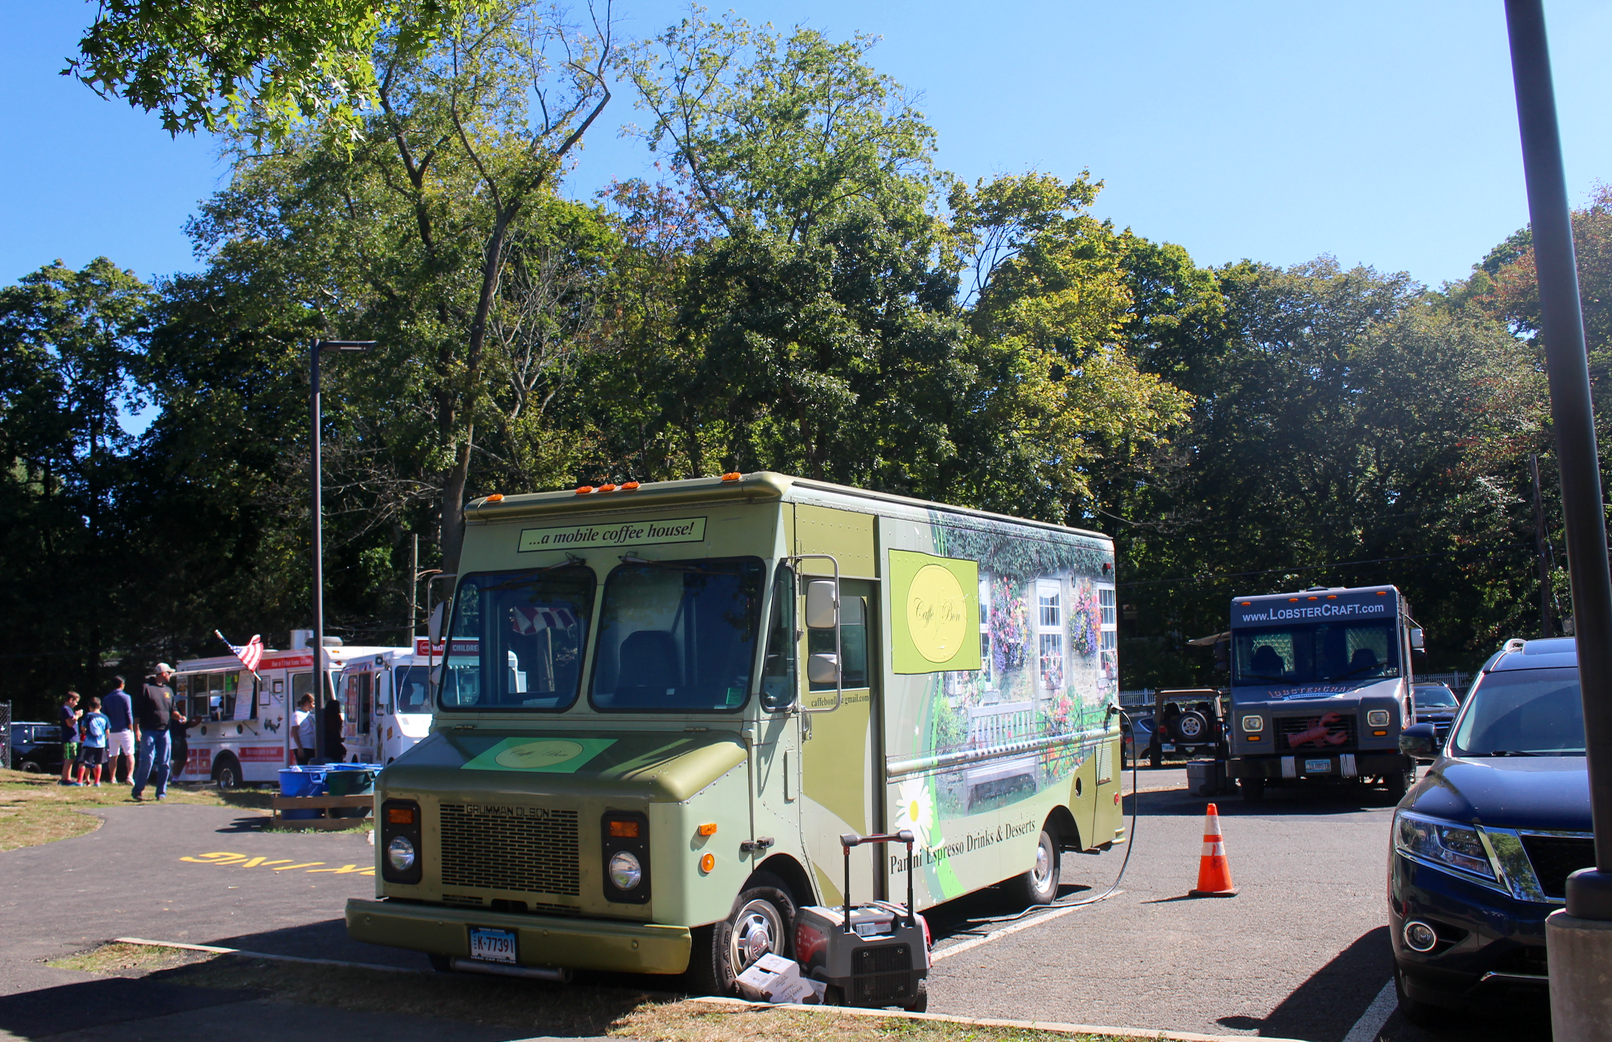 Food trucks in parking lots by fields 6 and 7 at Greenwich High School. Sunday Oct 1, 2017 Photo: Leslie Yager